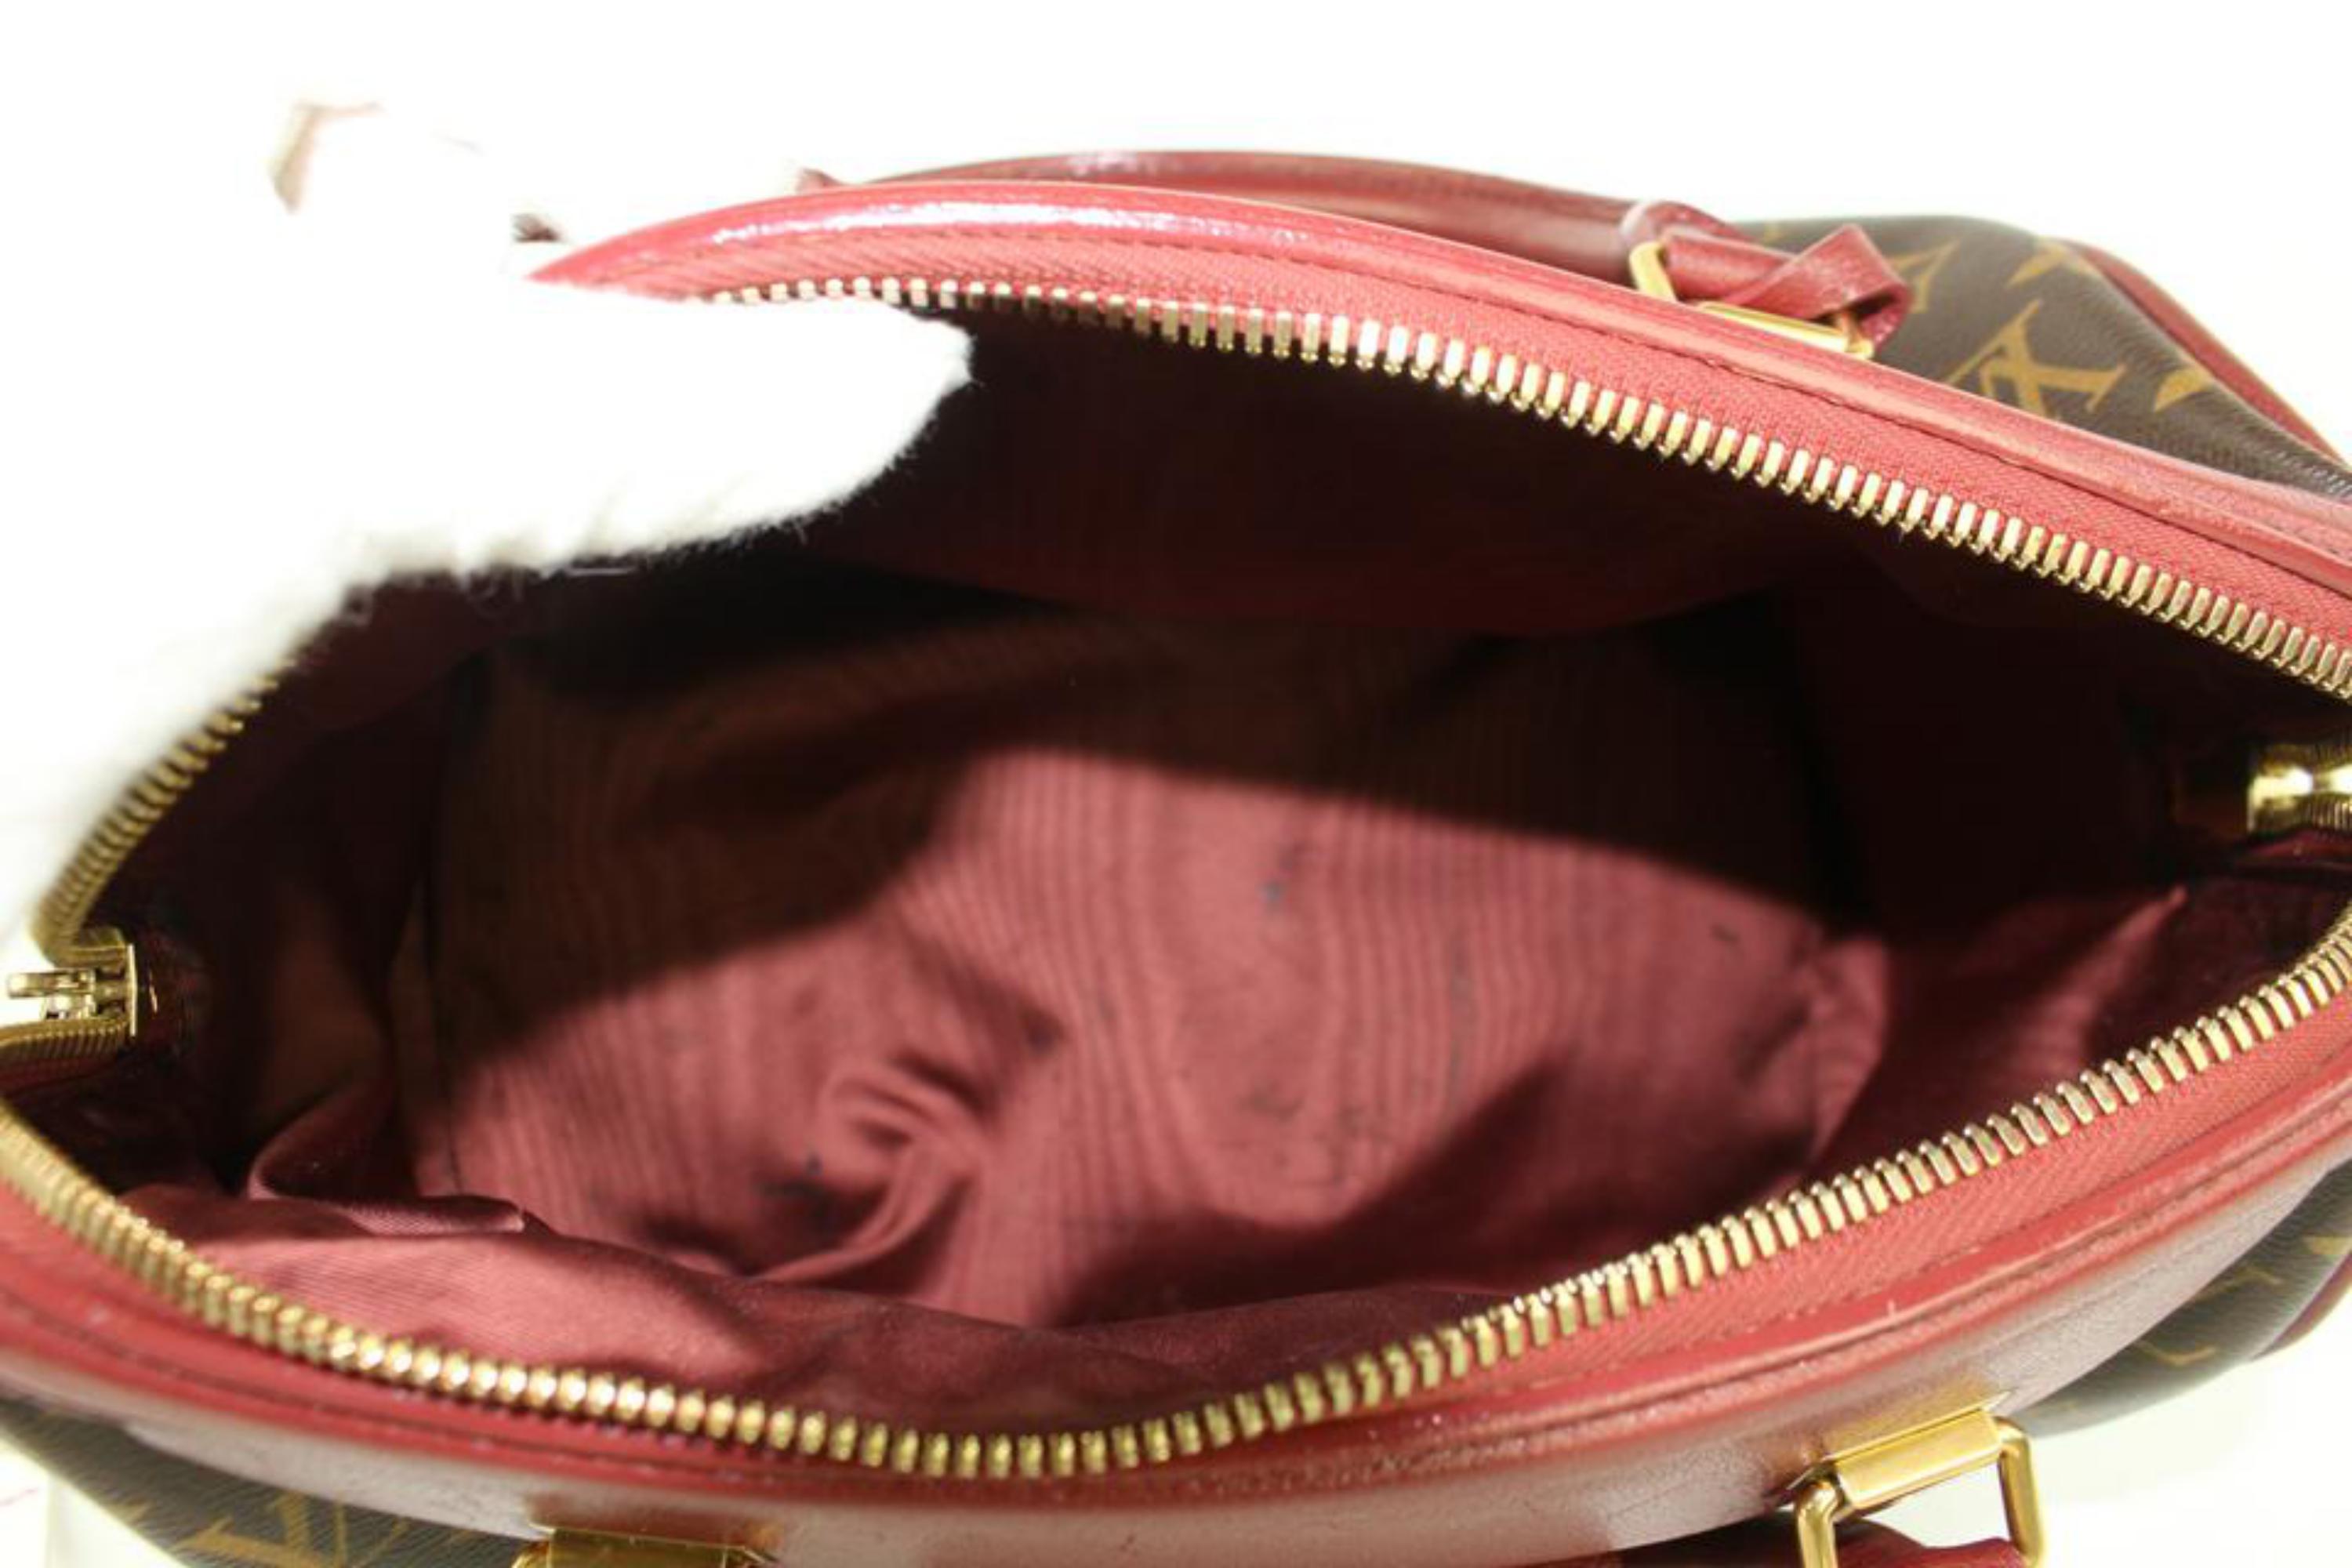 Louis Vuitton Speedy Limited Edition Bordeaux Golden Arrow 12lz0129  In Excellent Condition For Sale In Forest Hills, NY